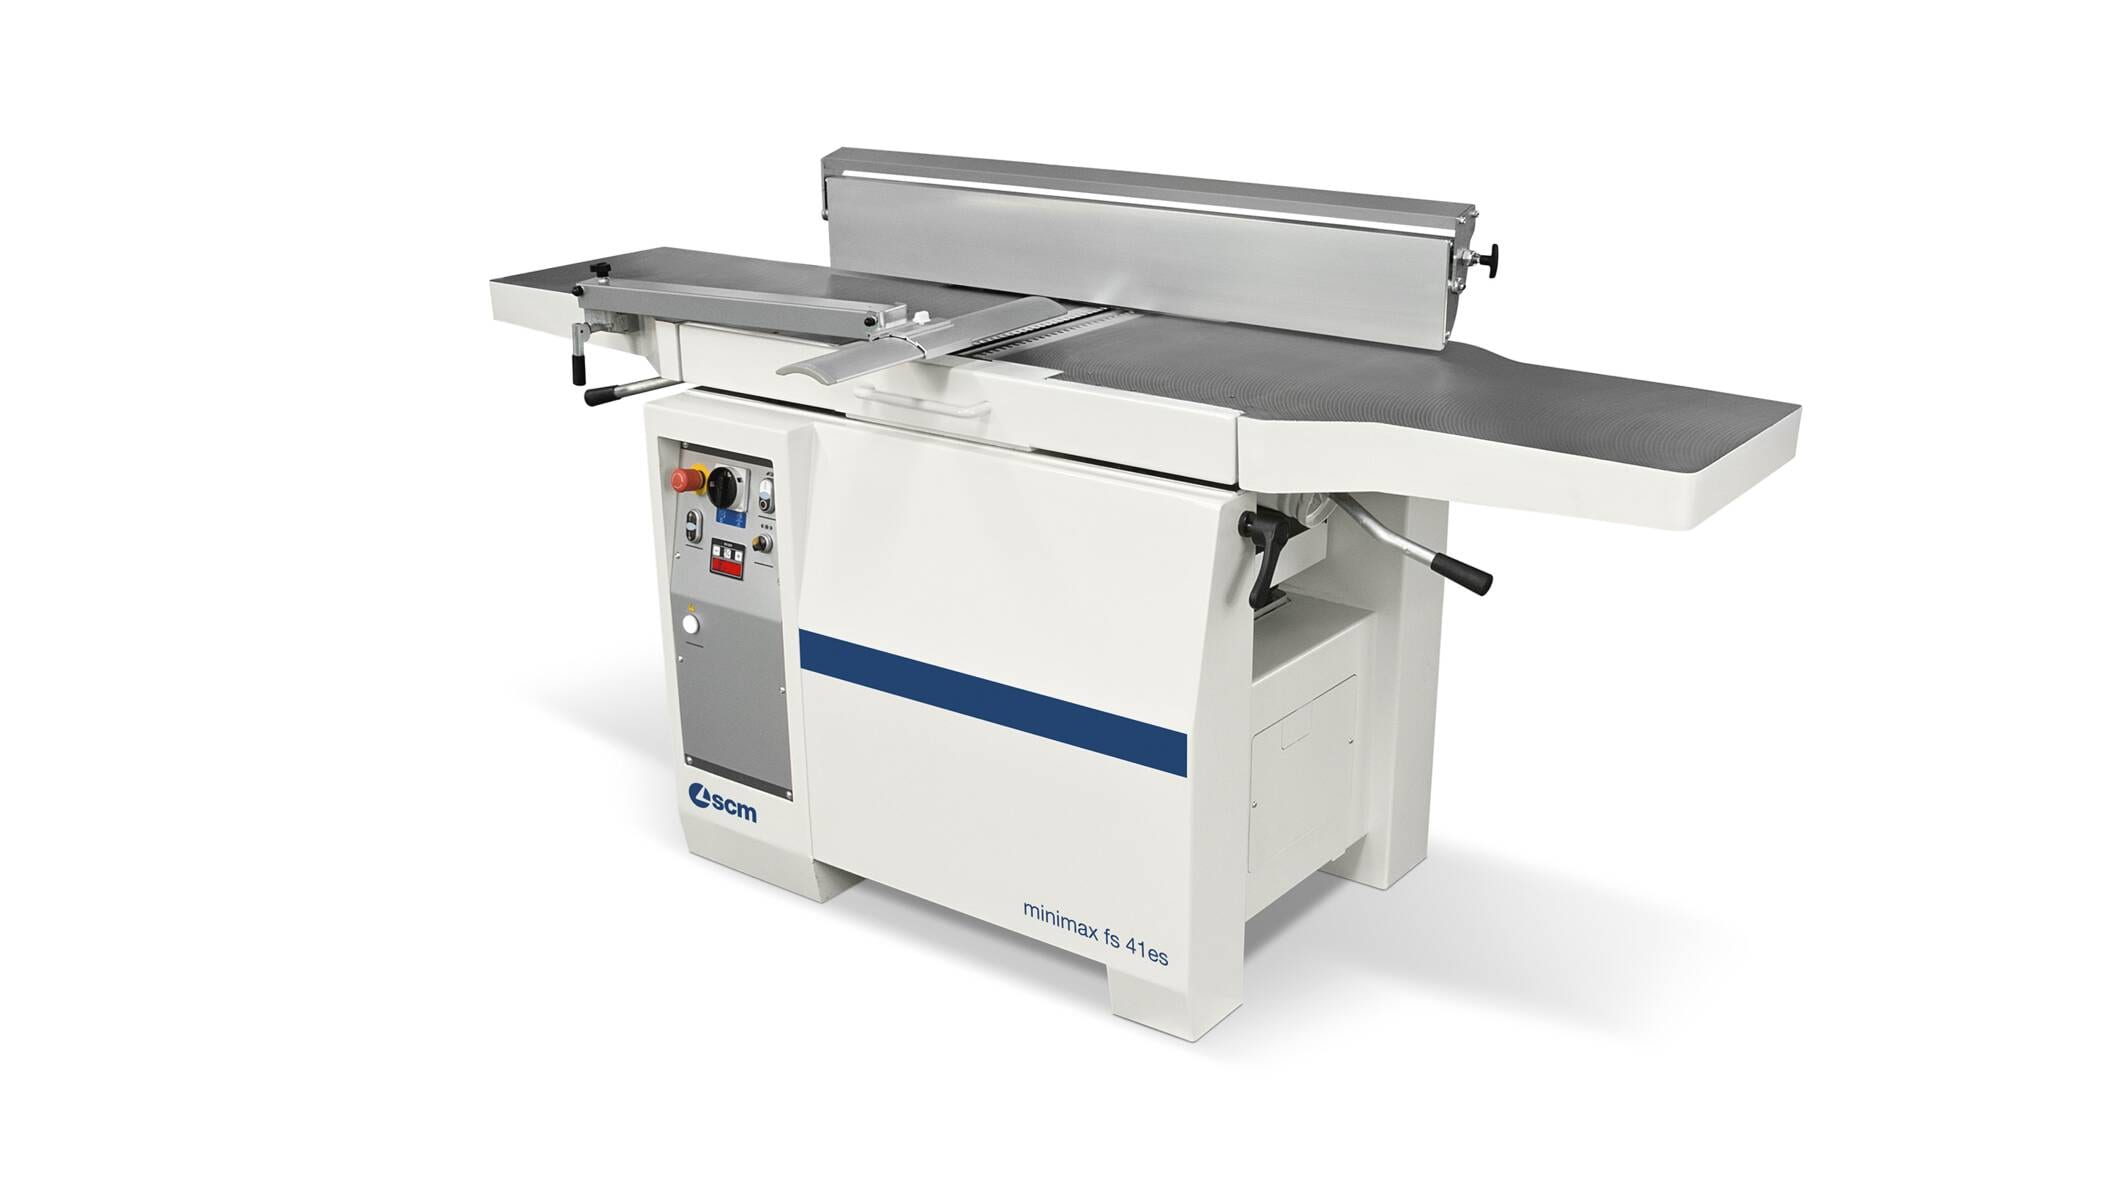 Joinery machines - Jointer/Planer Combination - minimax fs 41es